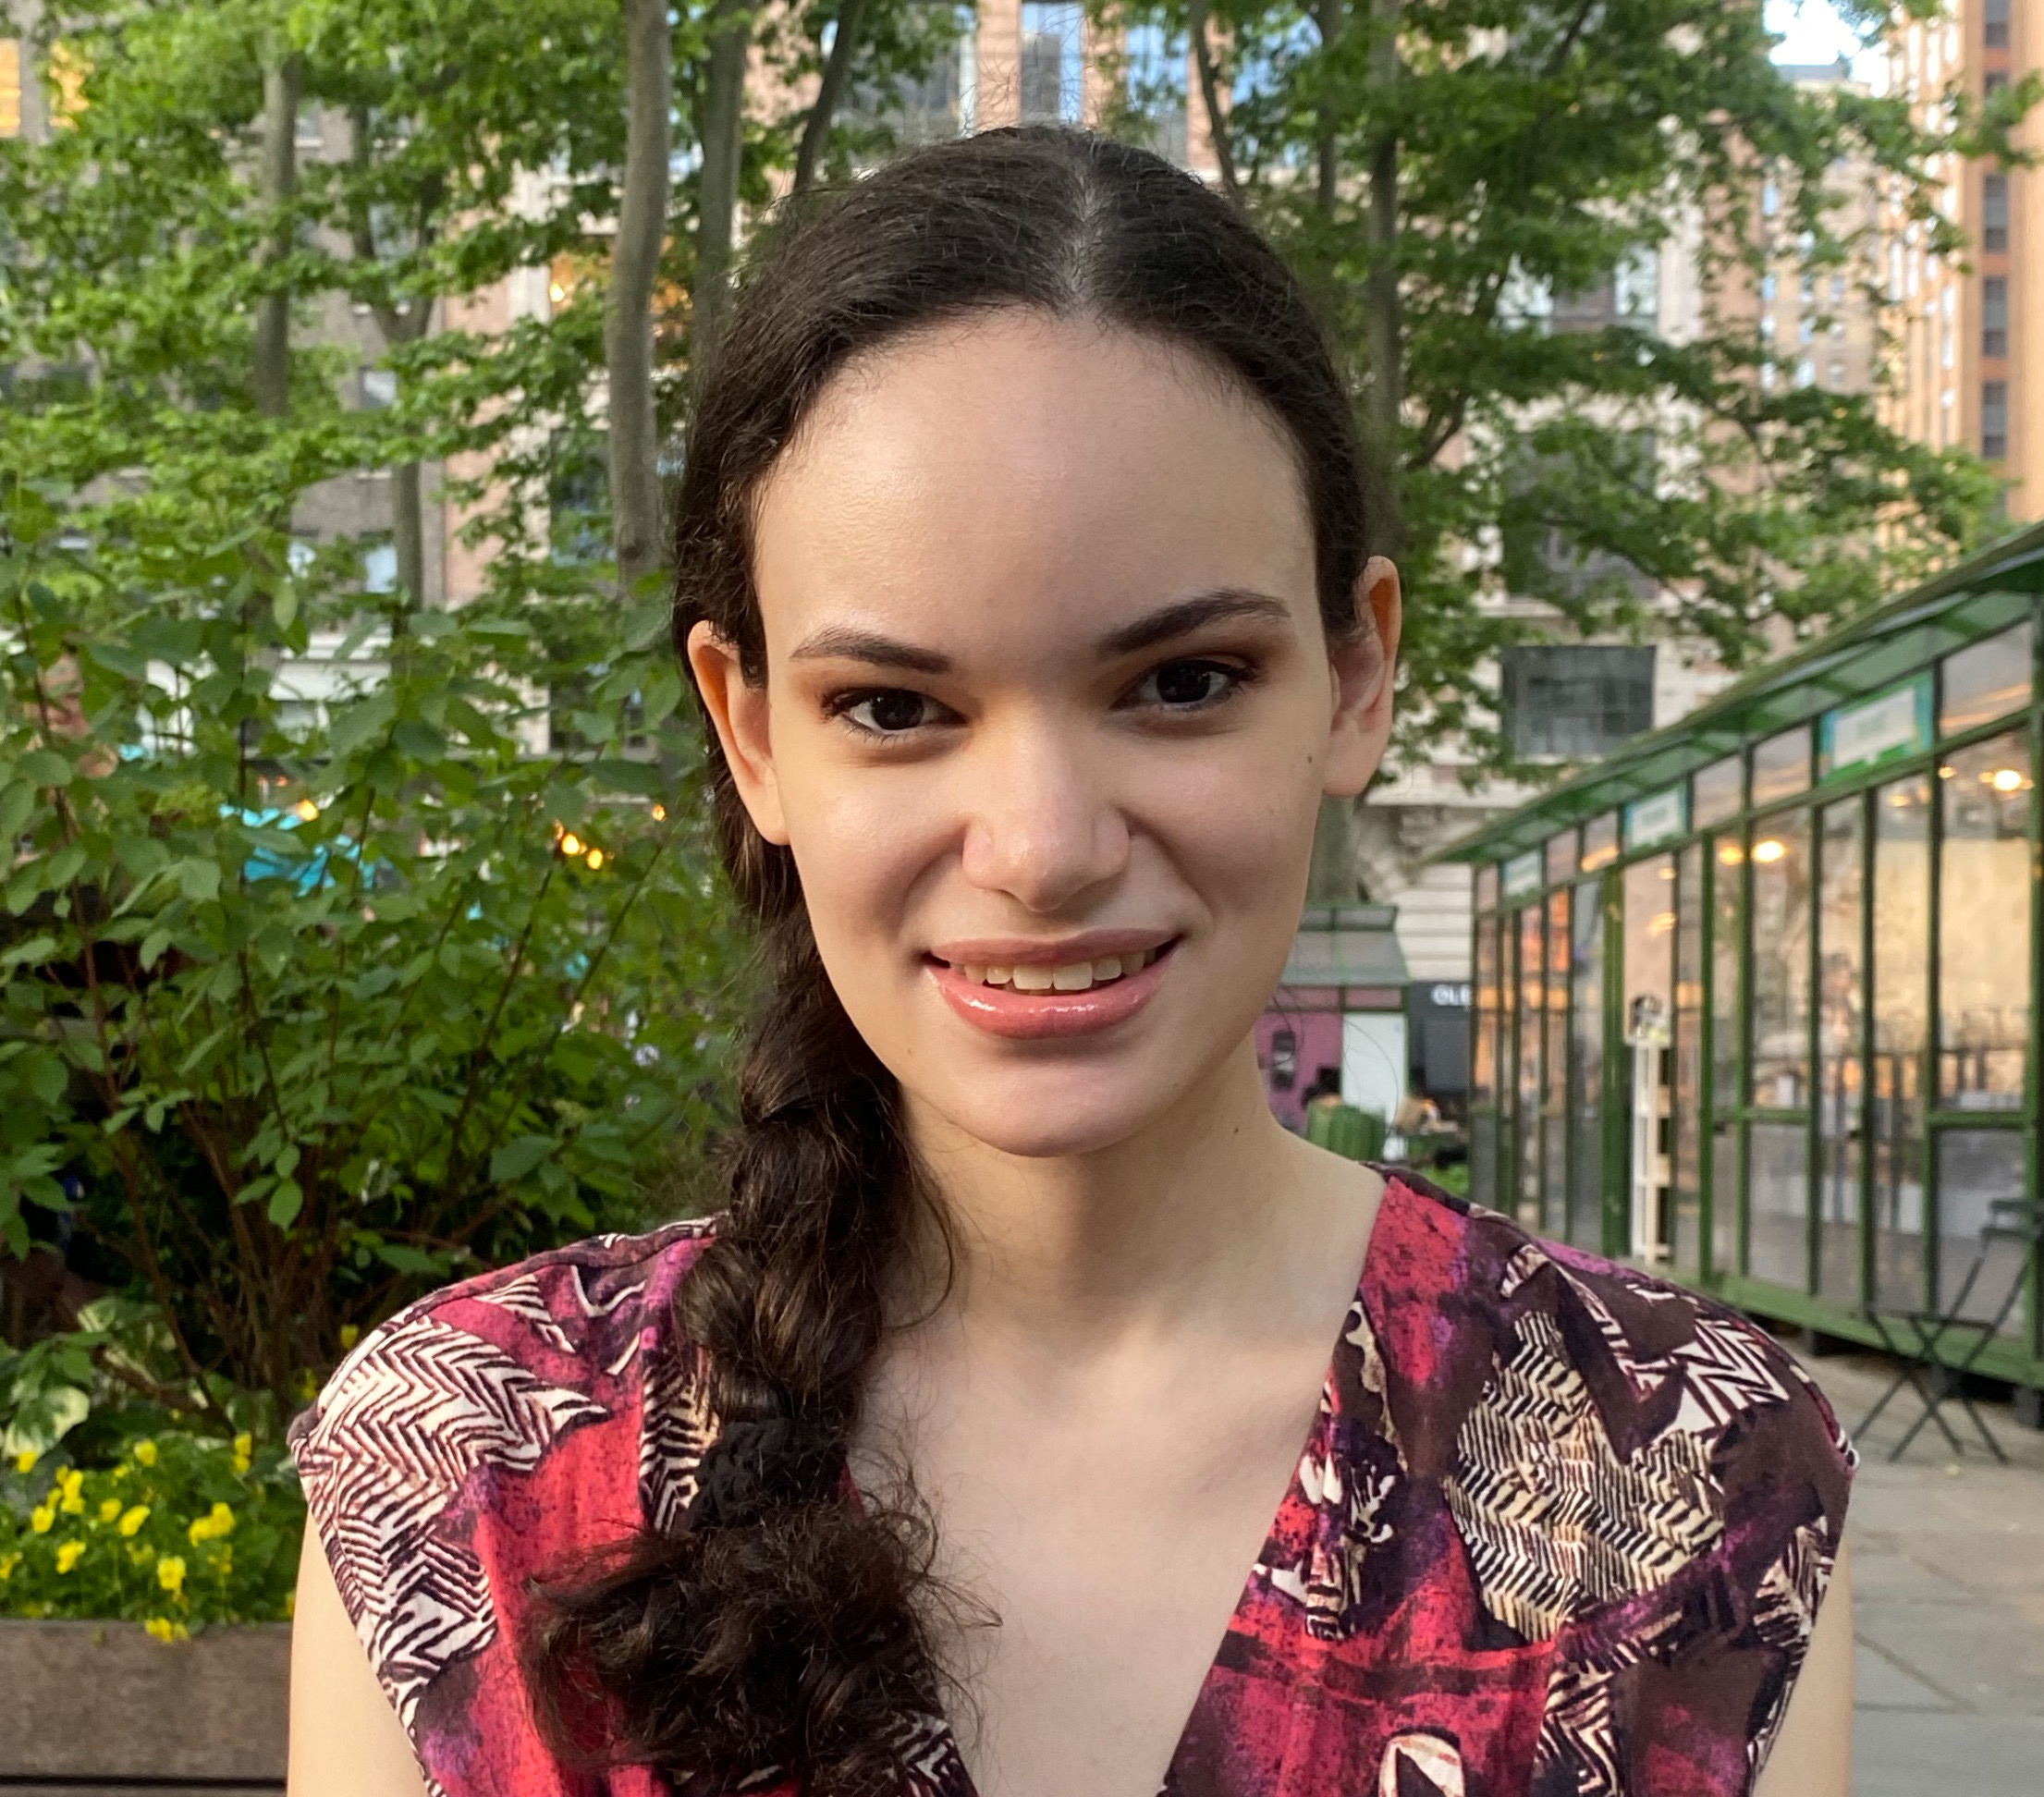 A picture of Zola Ray from the shoulders up, smiling in a red and brown patterned shirt. Her hair is in a braid and there is greenery in the background.